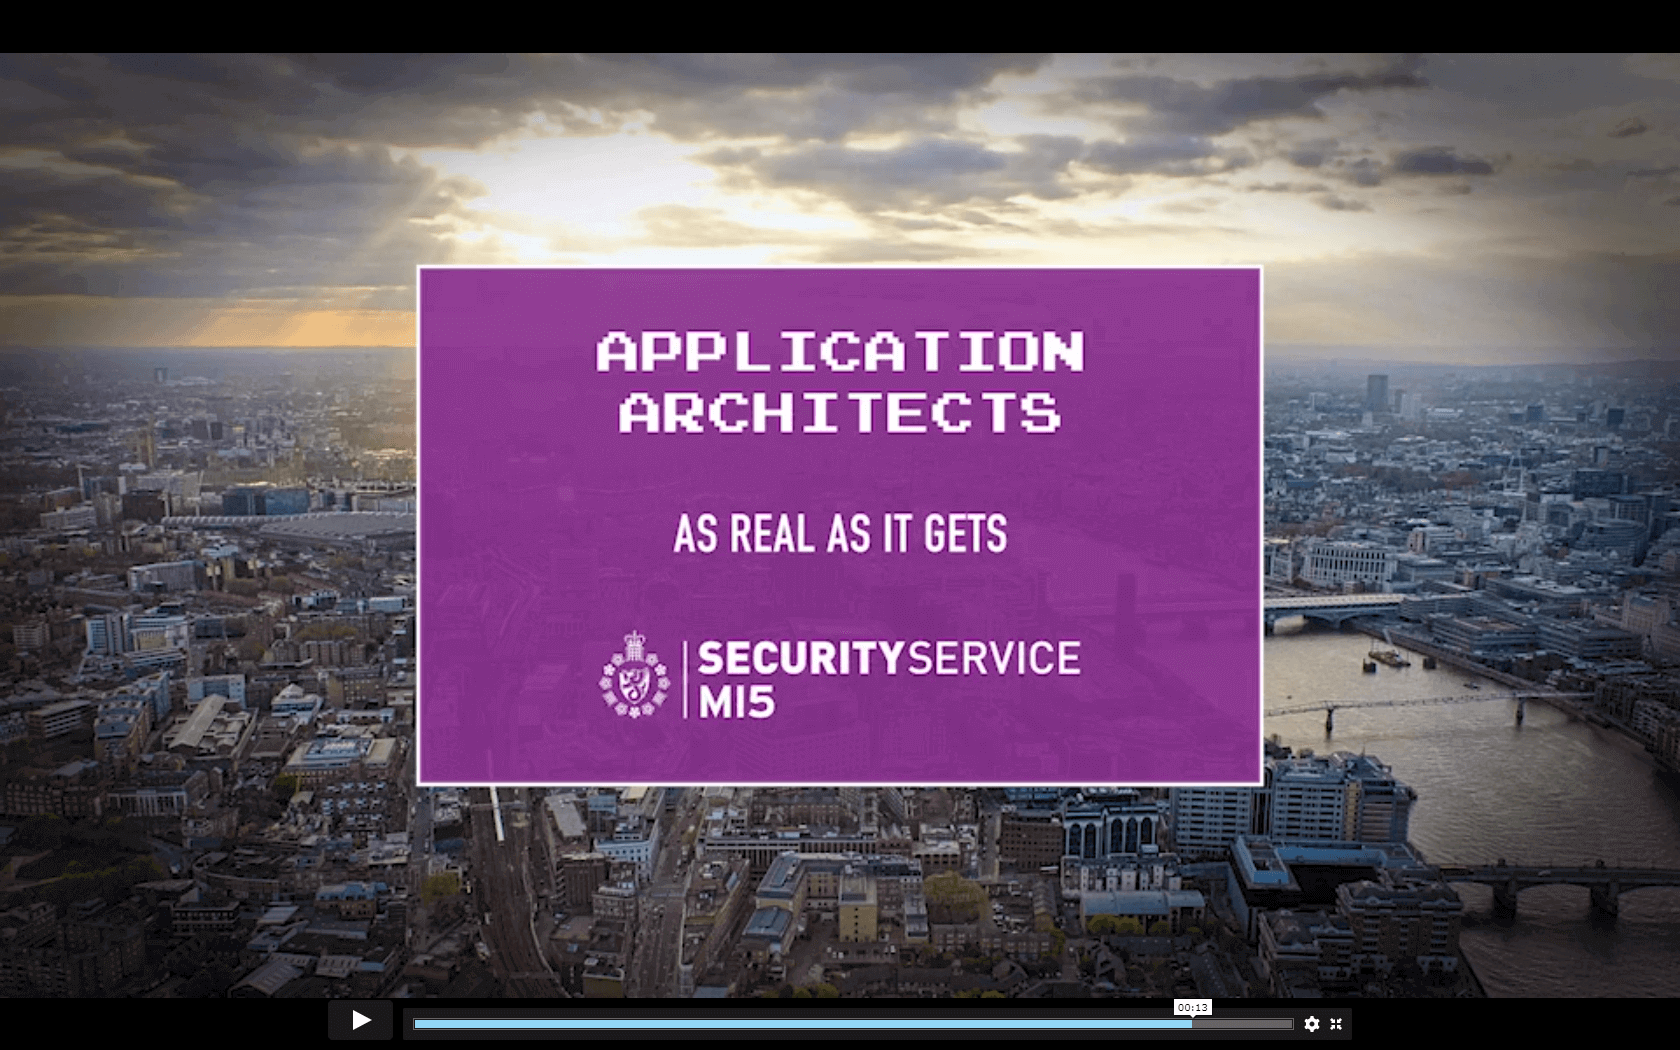 Application Architects- as real as it gets, Security Service MI5